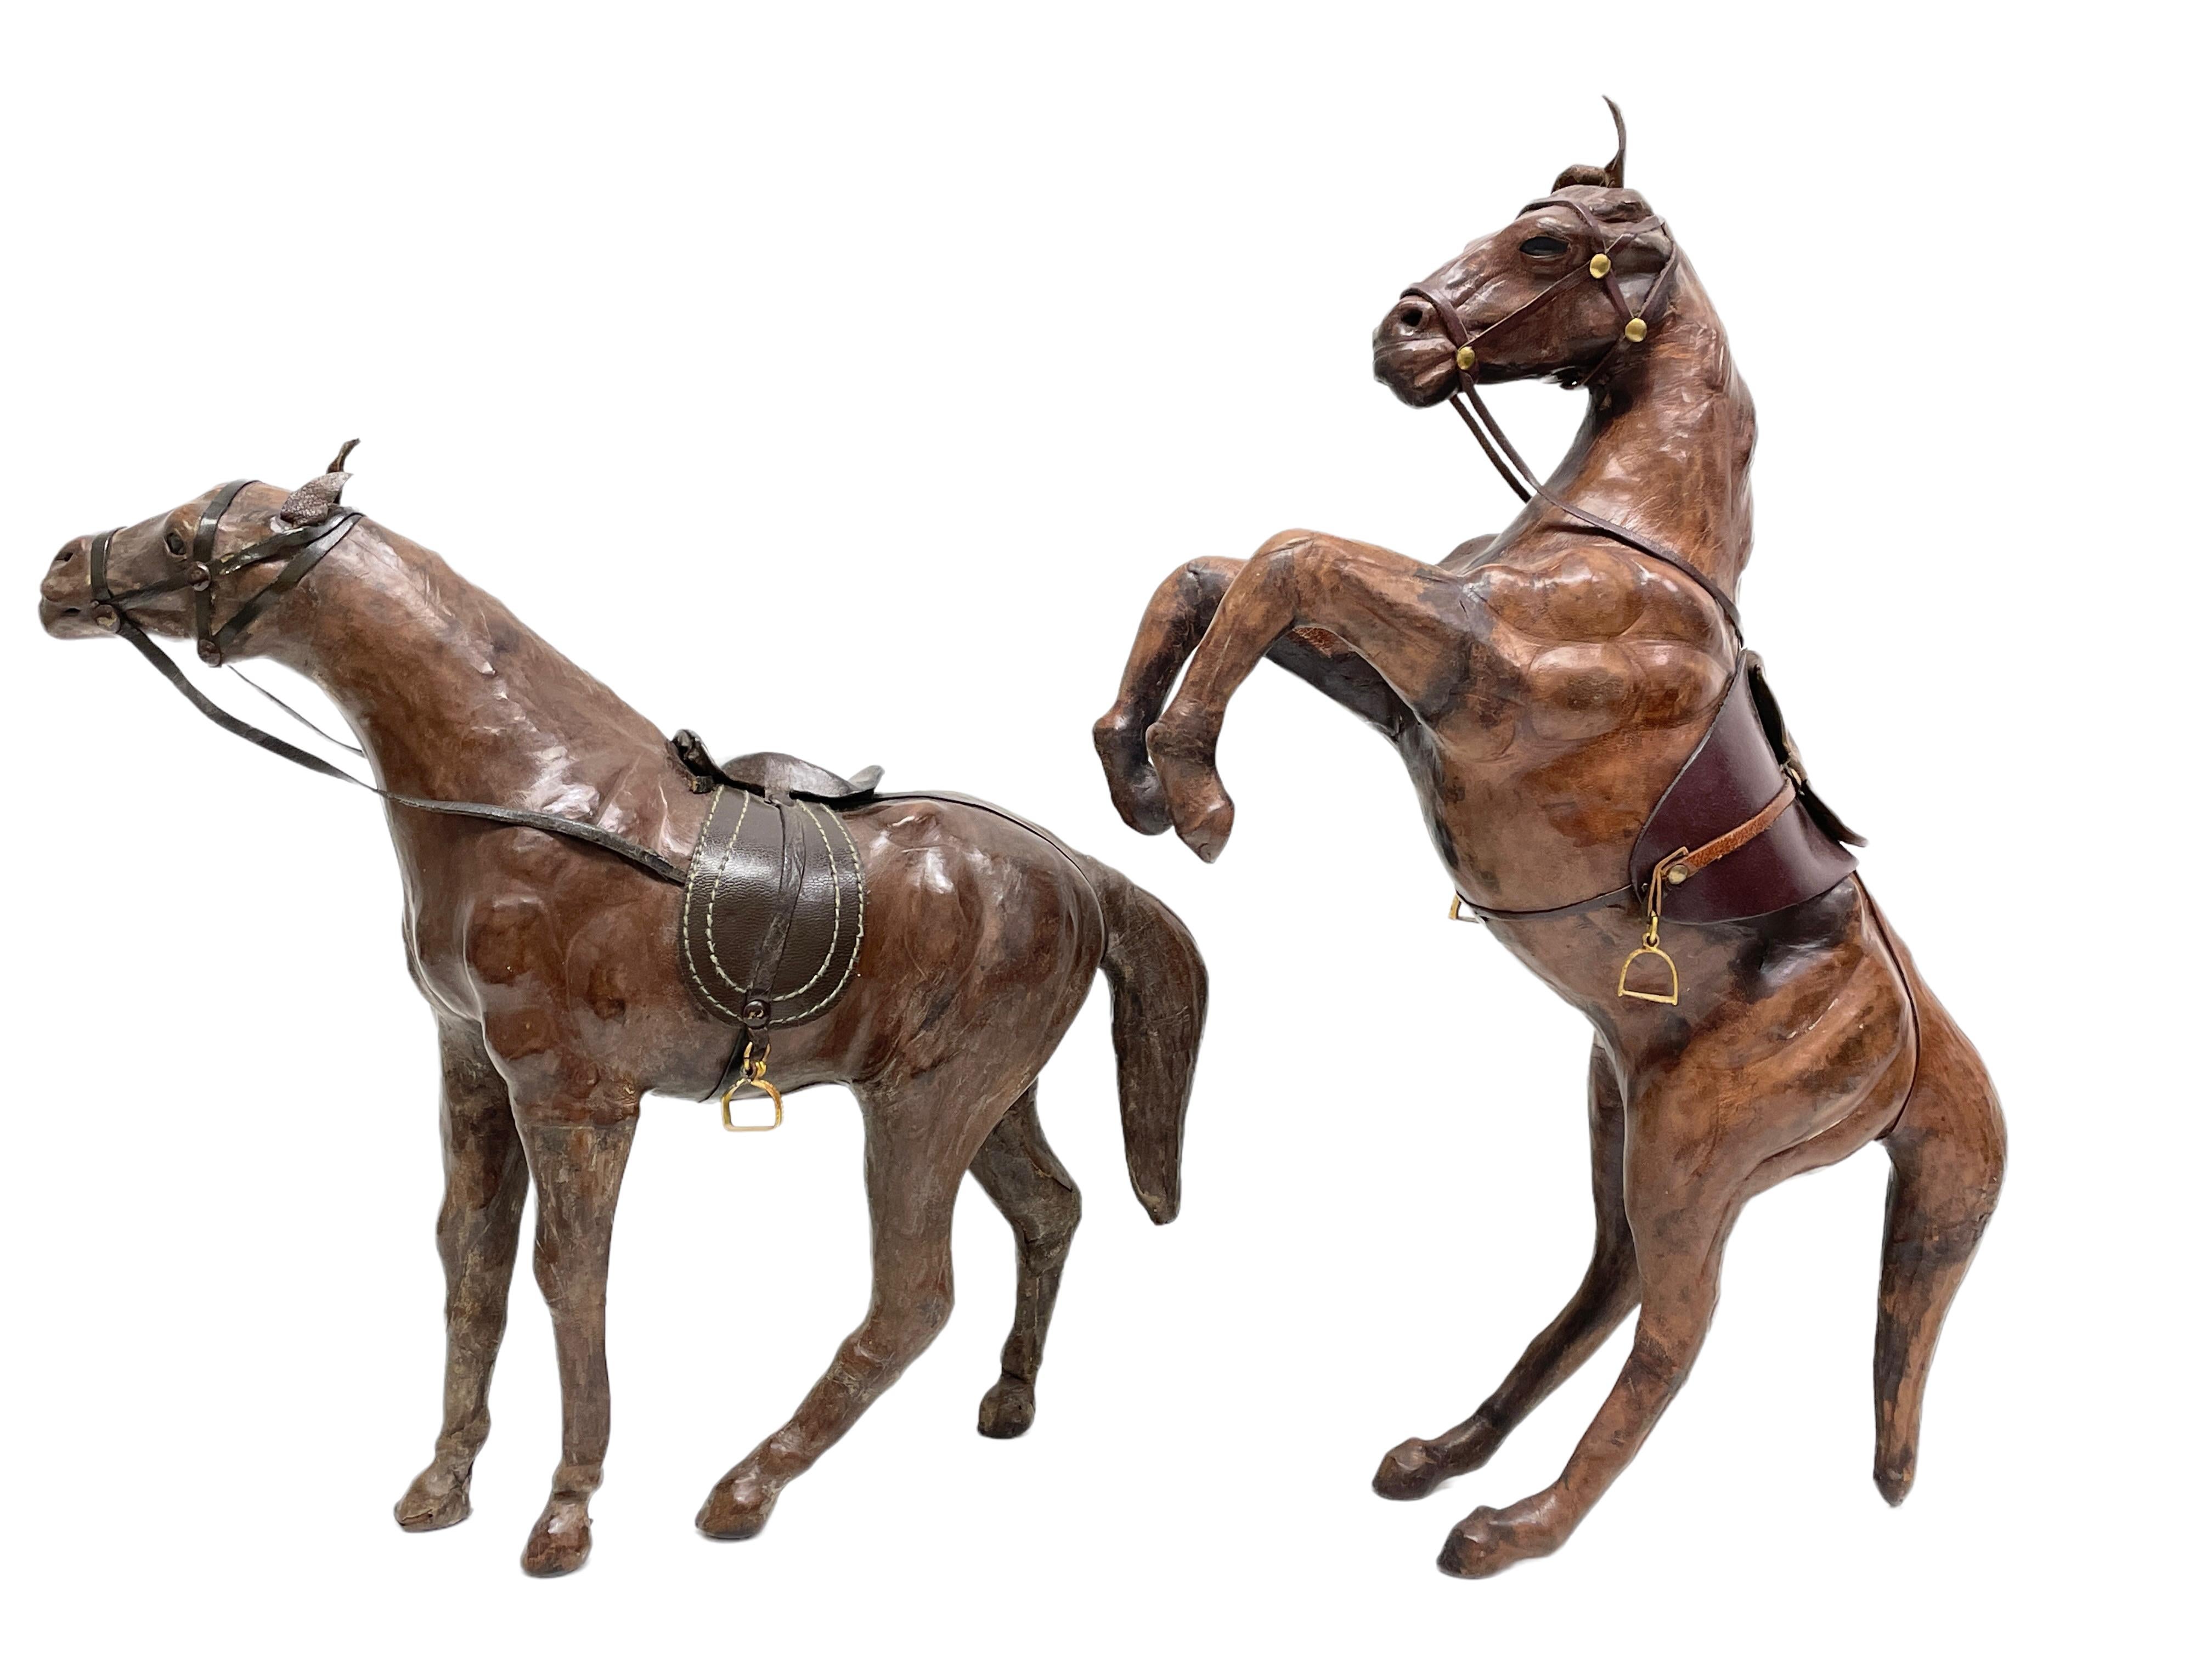 Pair of horse sculptures in leather in the style of Dimitri Omersa for Abercombie & Fitch
Unmarked. Brown tones, Glass eyes and brass parts.
Standing horse: 16.25